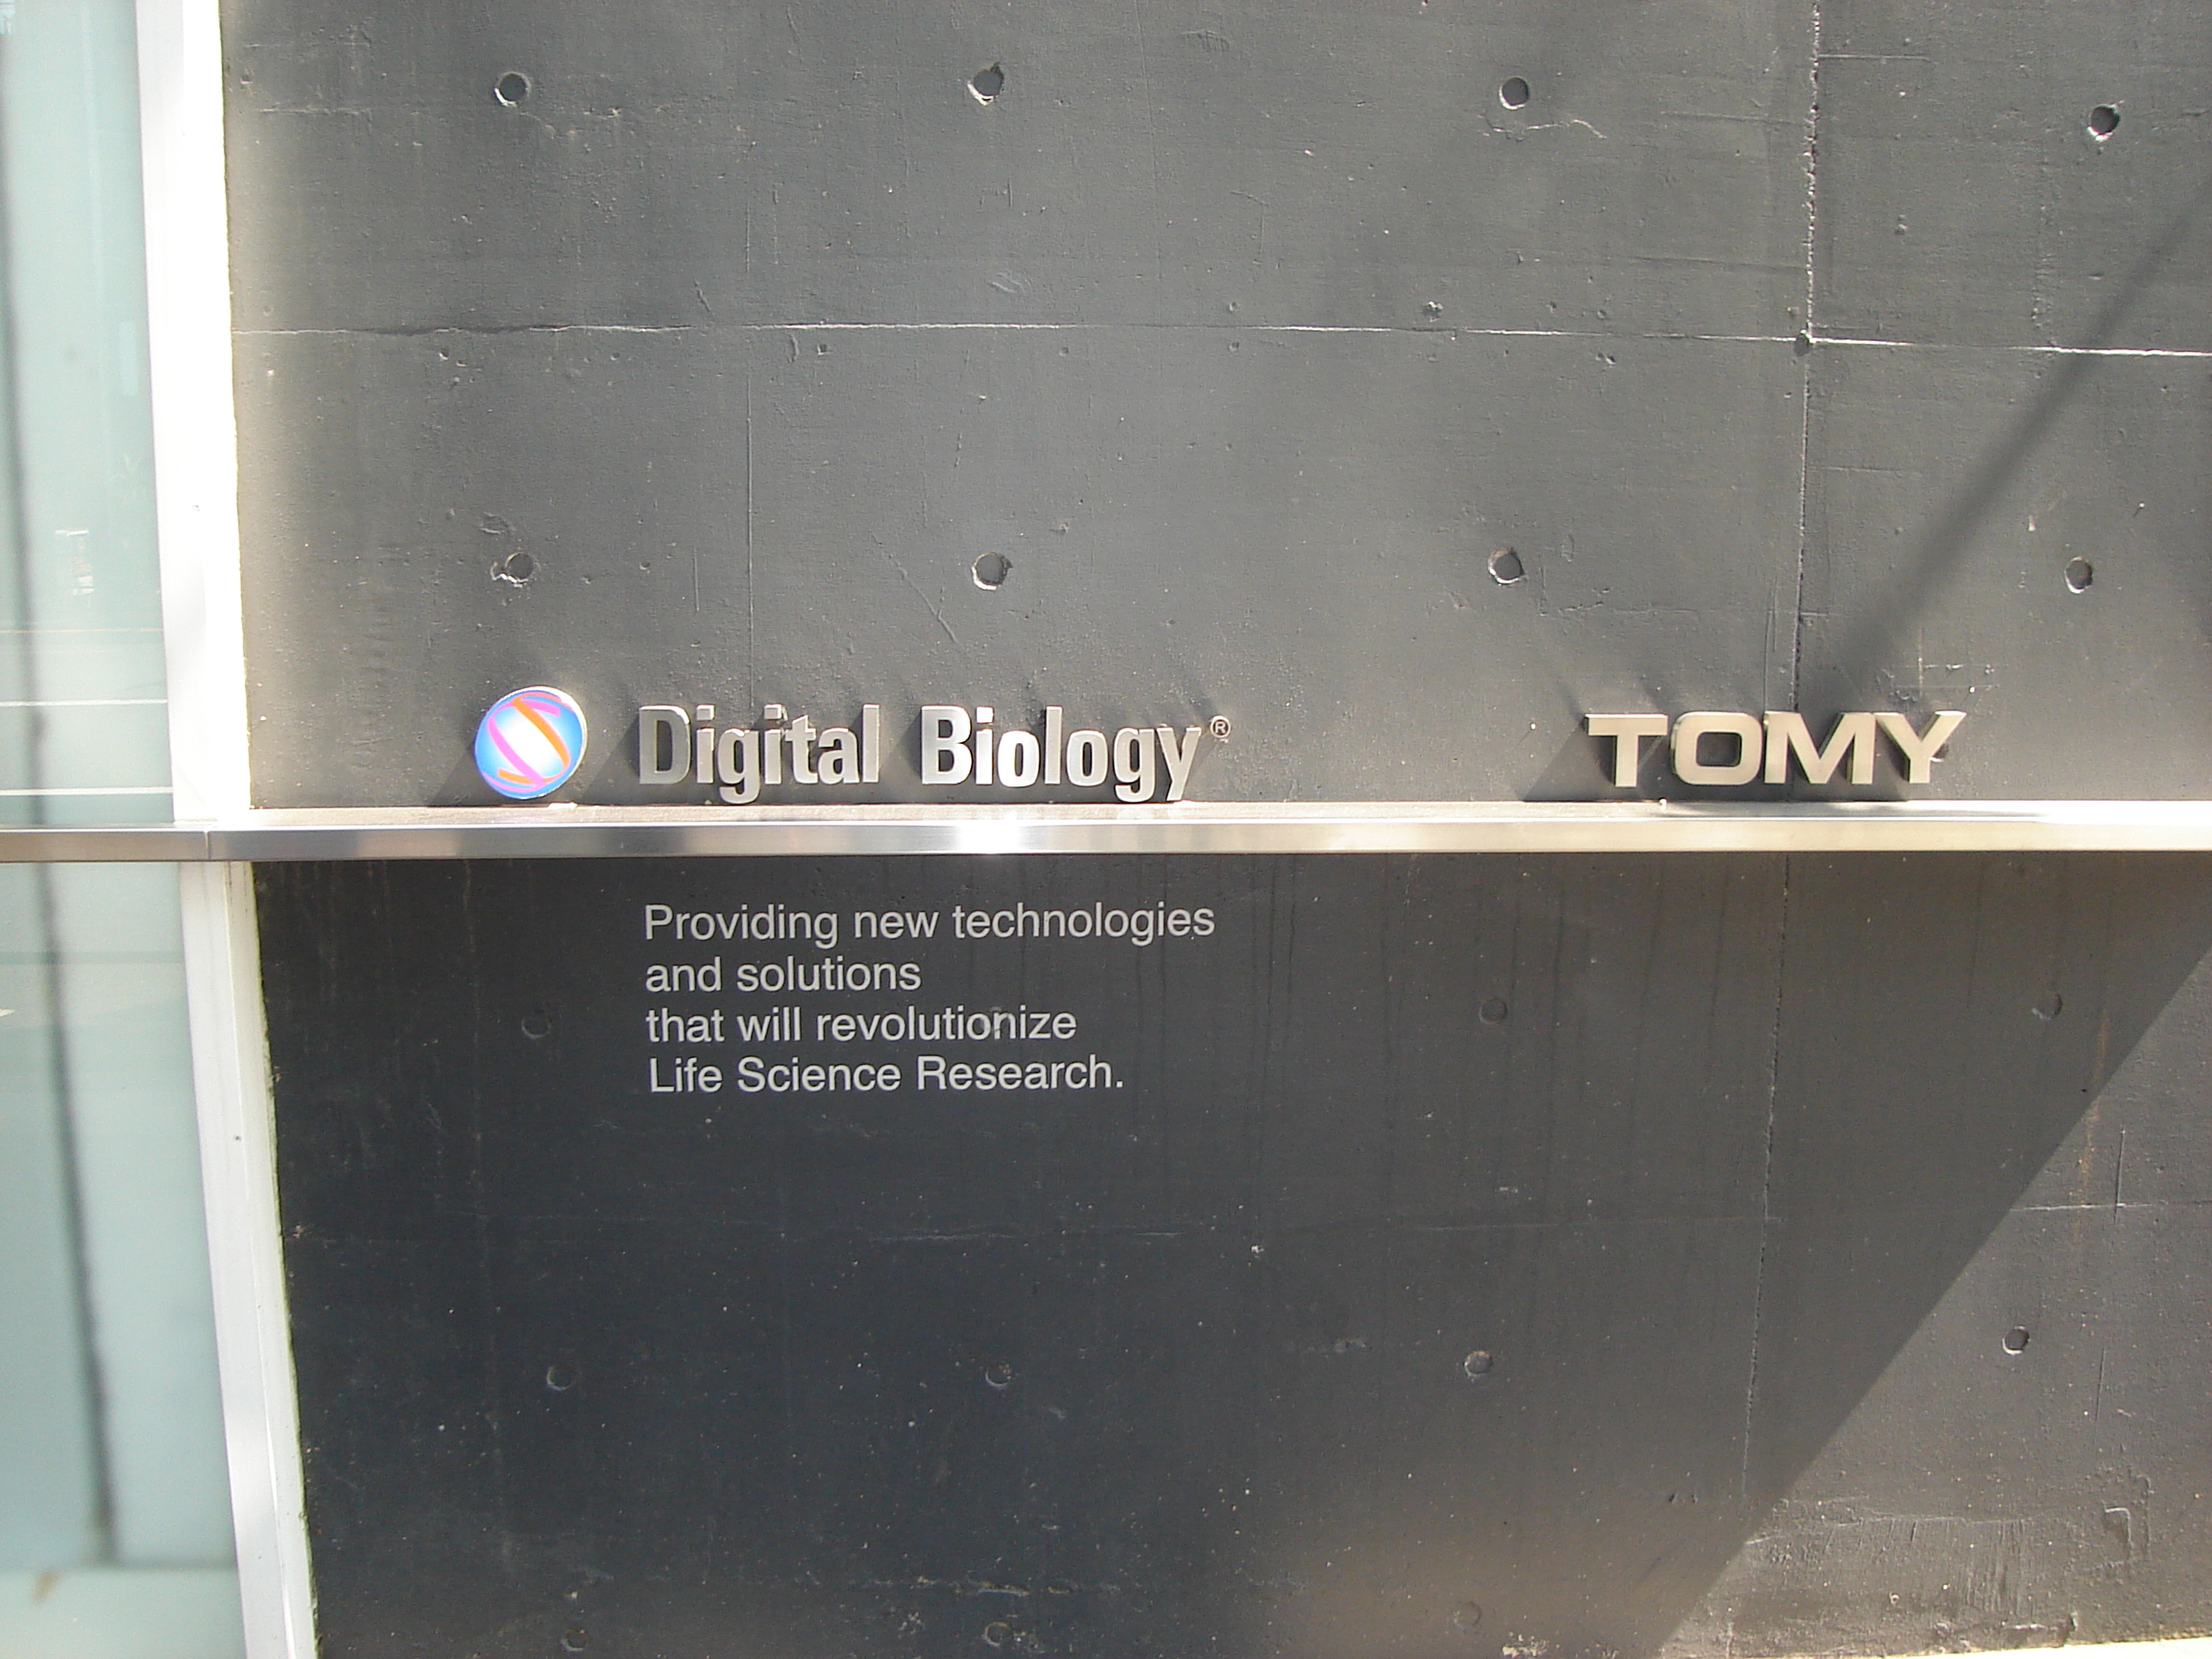 the Tomy digital biology building sign reads Providing new technologies and solutions that will revolutionize Life Science Research.